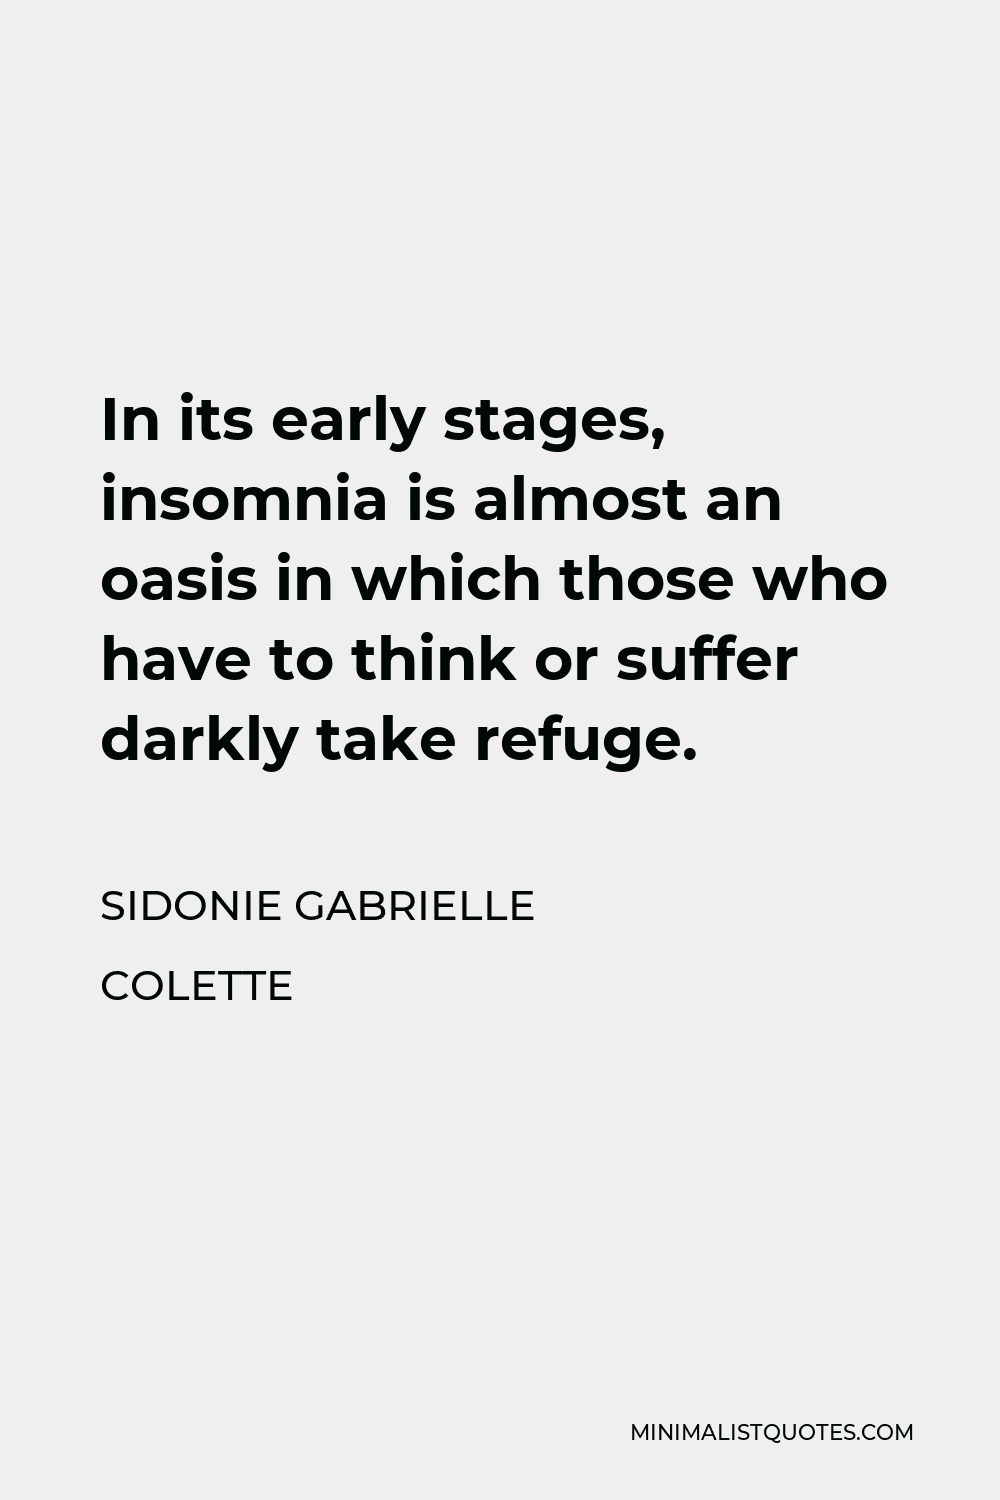 Sidonie Gabrielle Colette Quote - In its early stages, insomnia is almost an oasis in which those who have to think or suffer darkly take refuge.